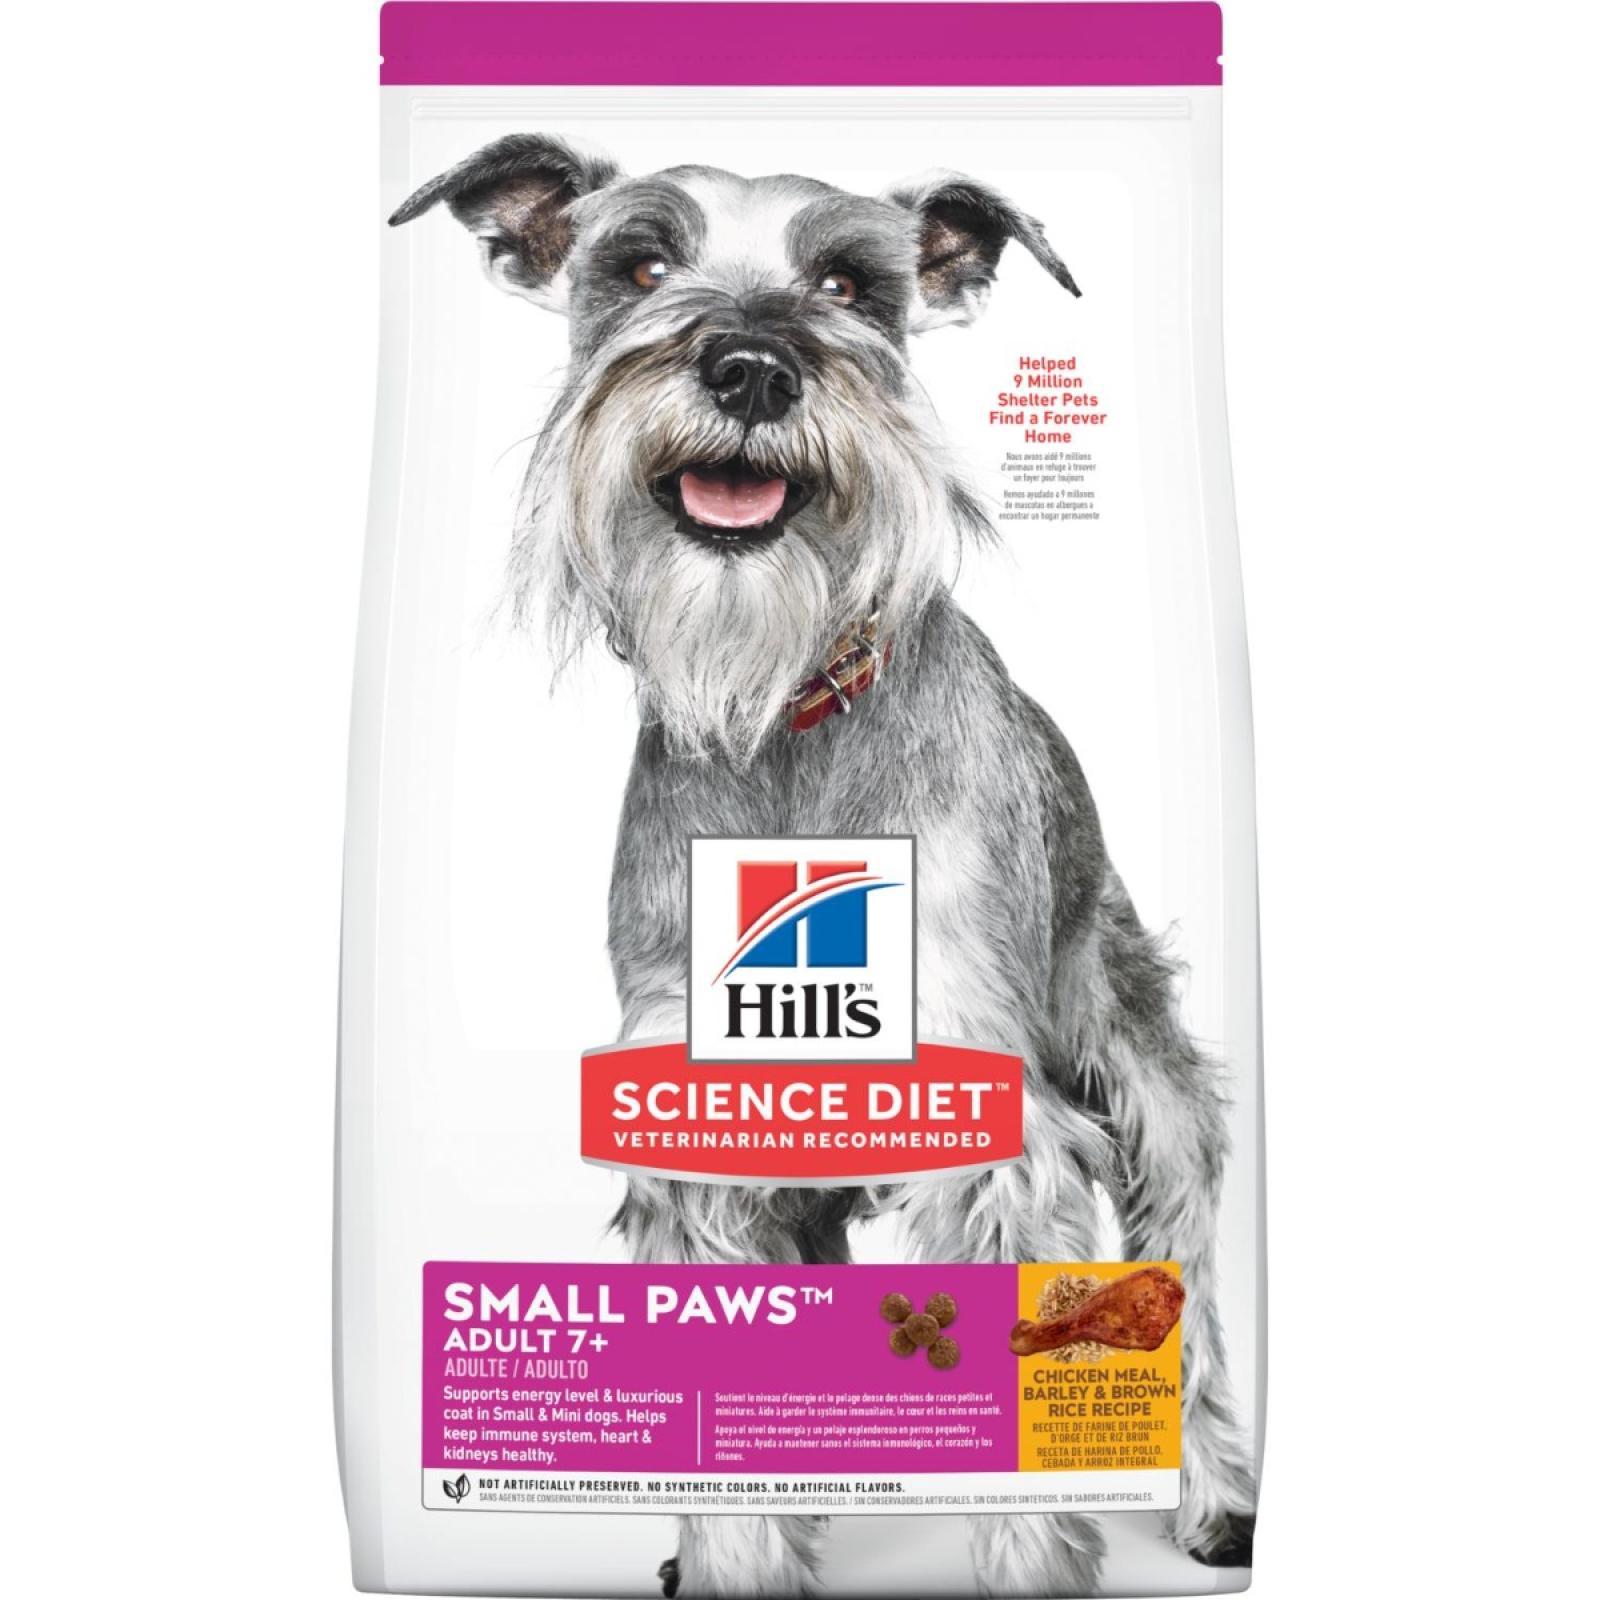 Hill's Science Diet Adult 7+ Small Paws™ Chicken, Barley & Brown Rice